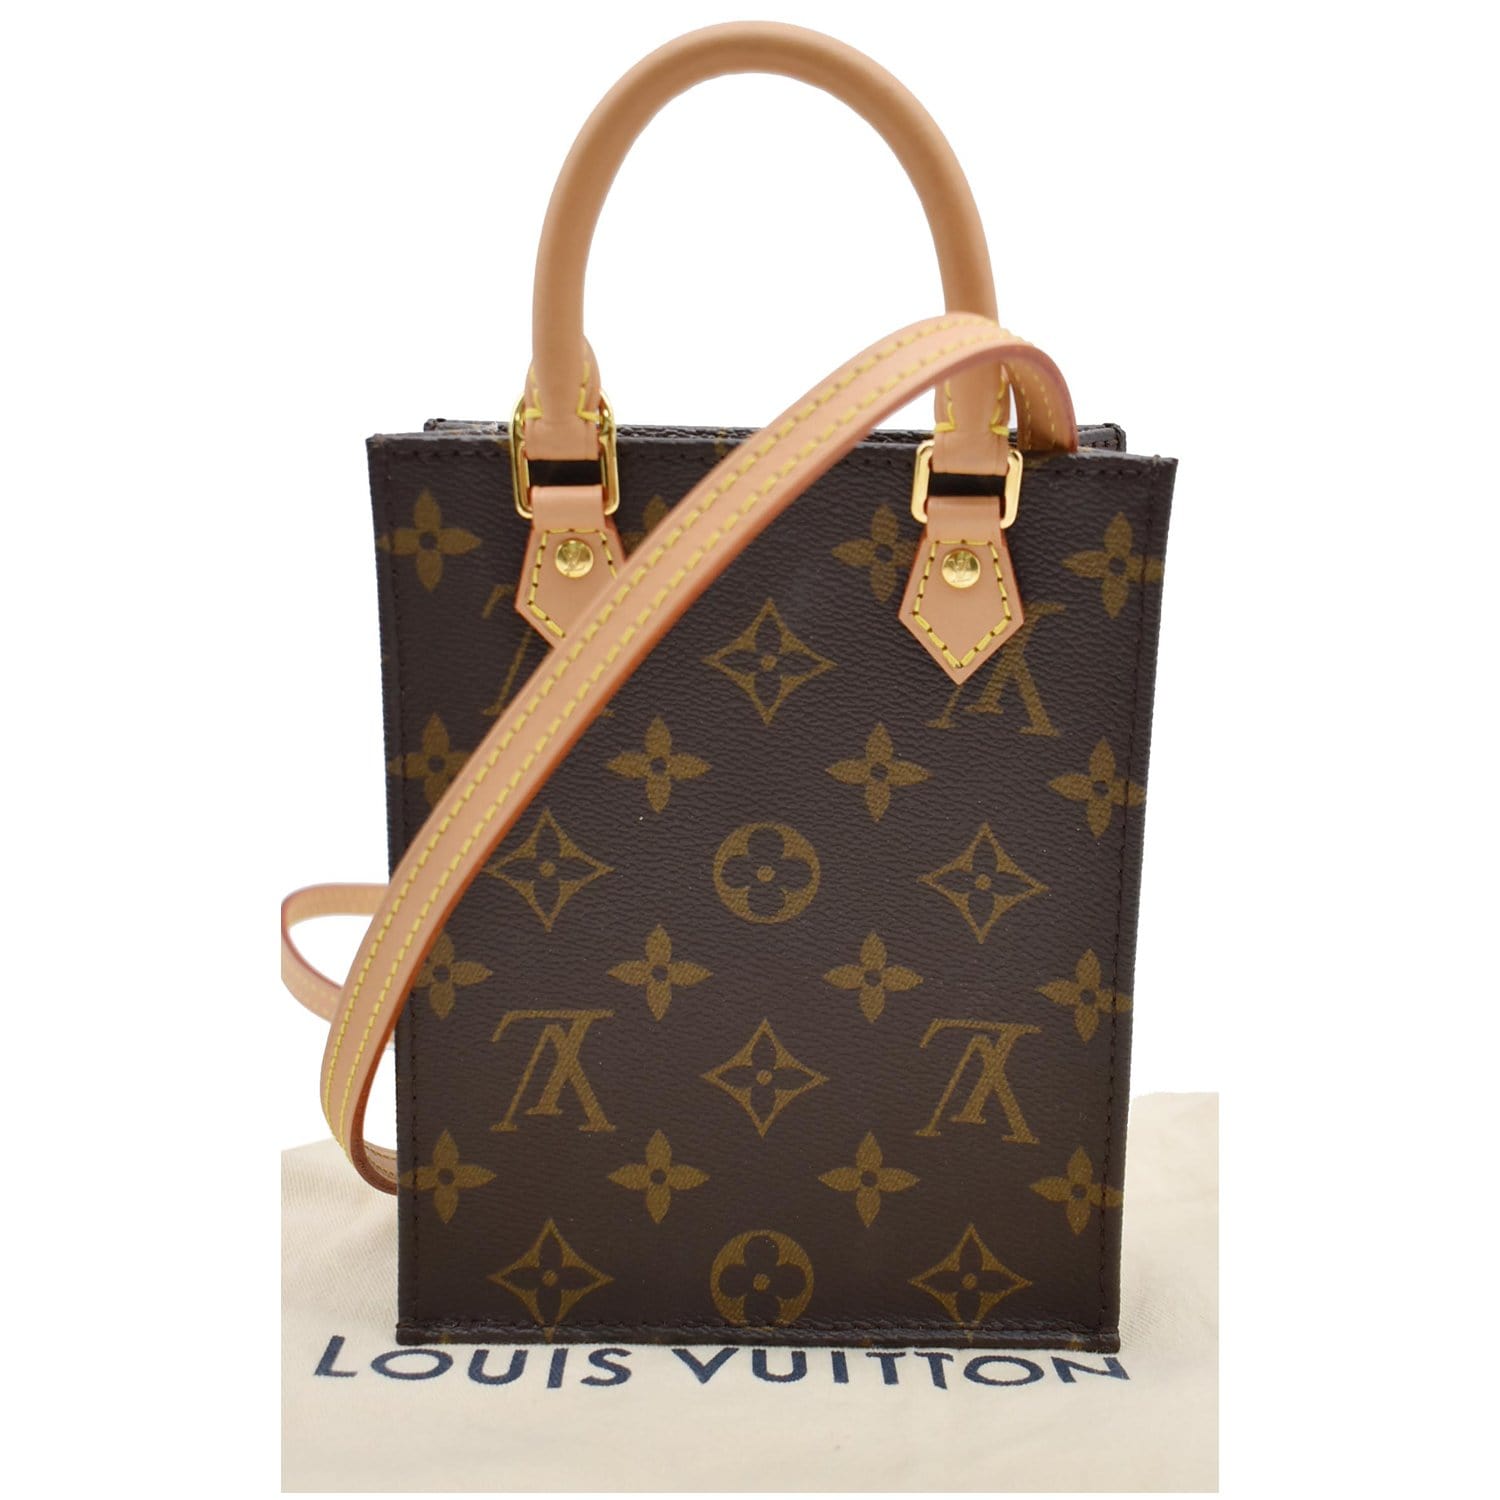 Petit Sac Plat I finally got my hands on. LOVE this bag so far. Have  purchased SLG and some preloved pieces but this is my first bag 🤍 :  r/Louisvuitton